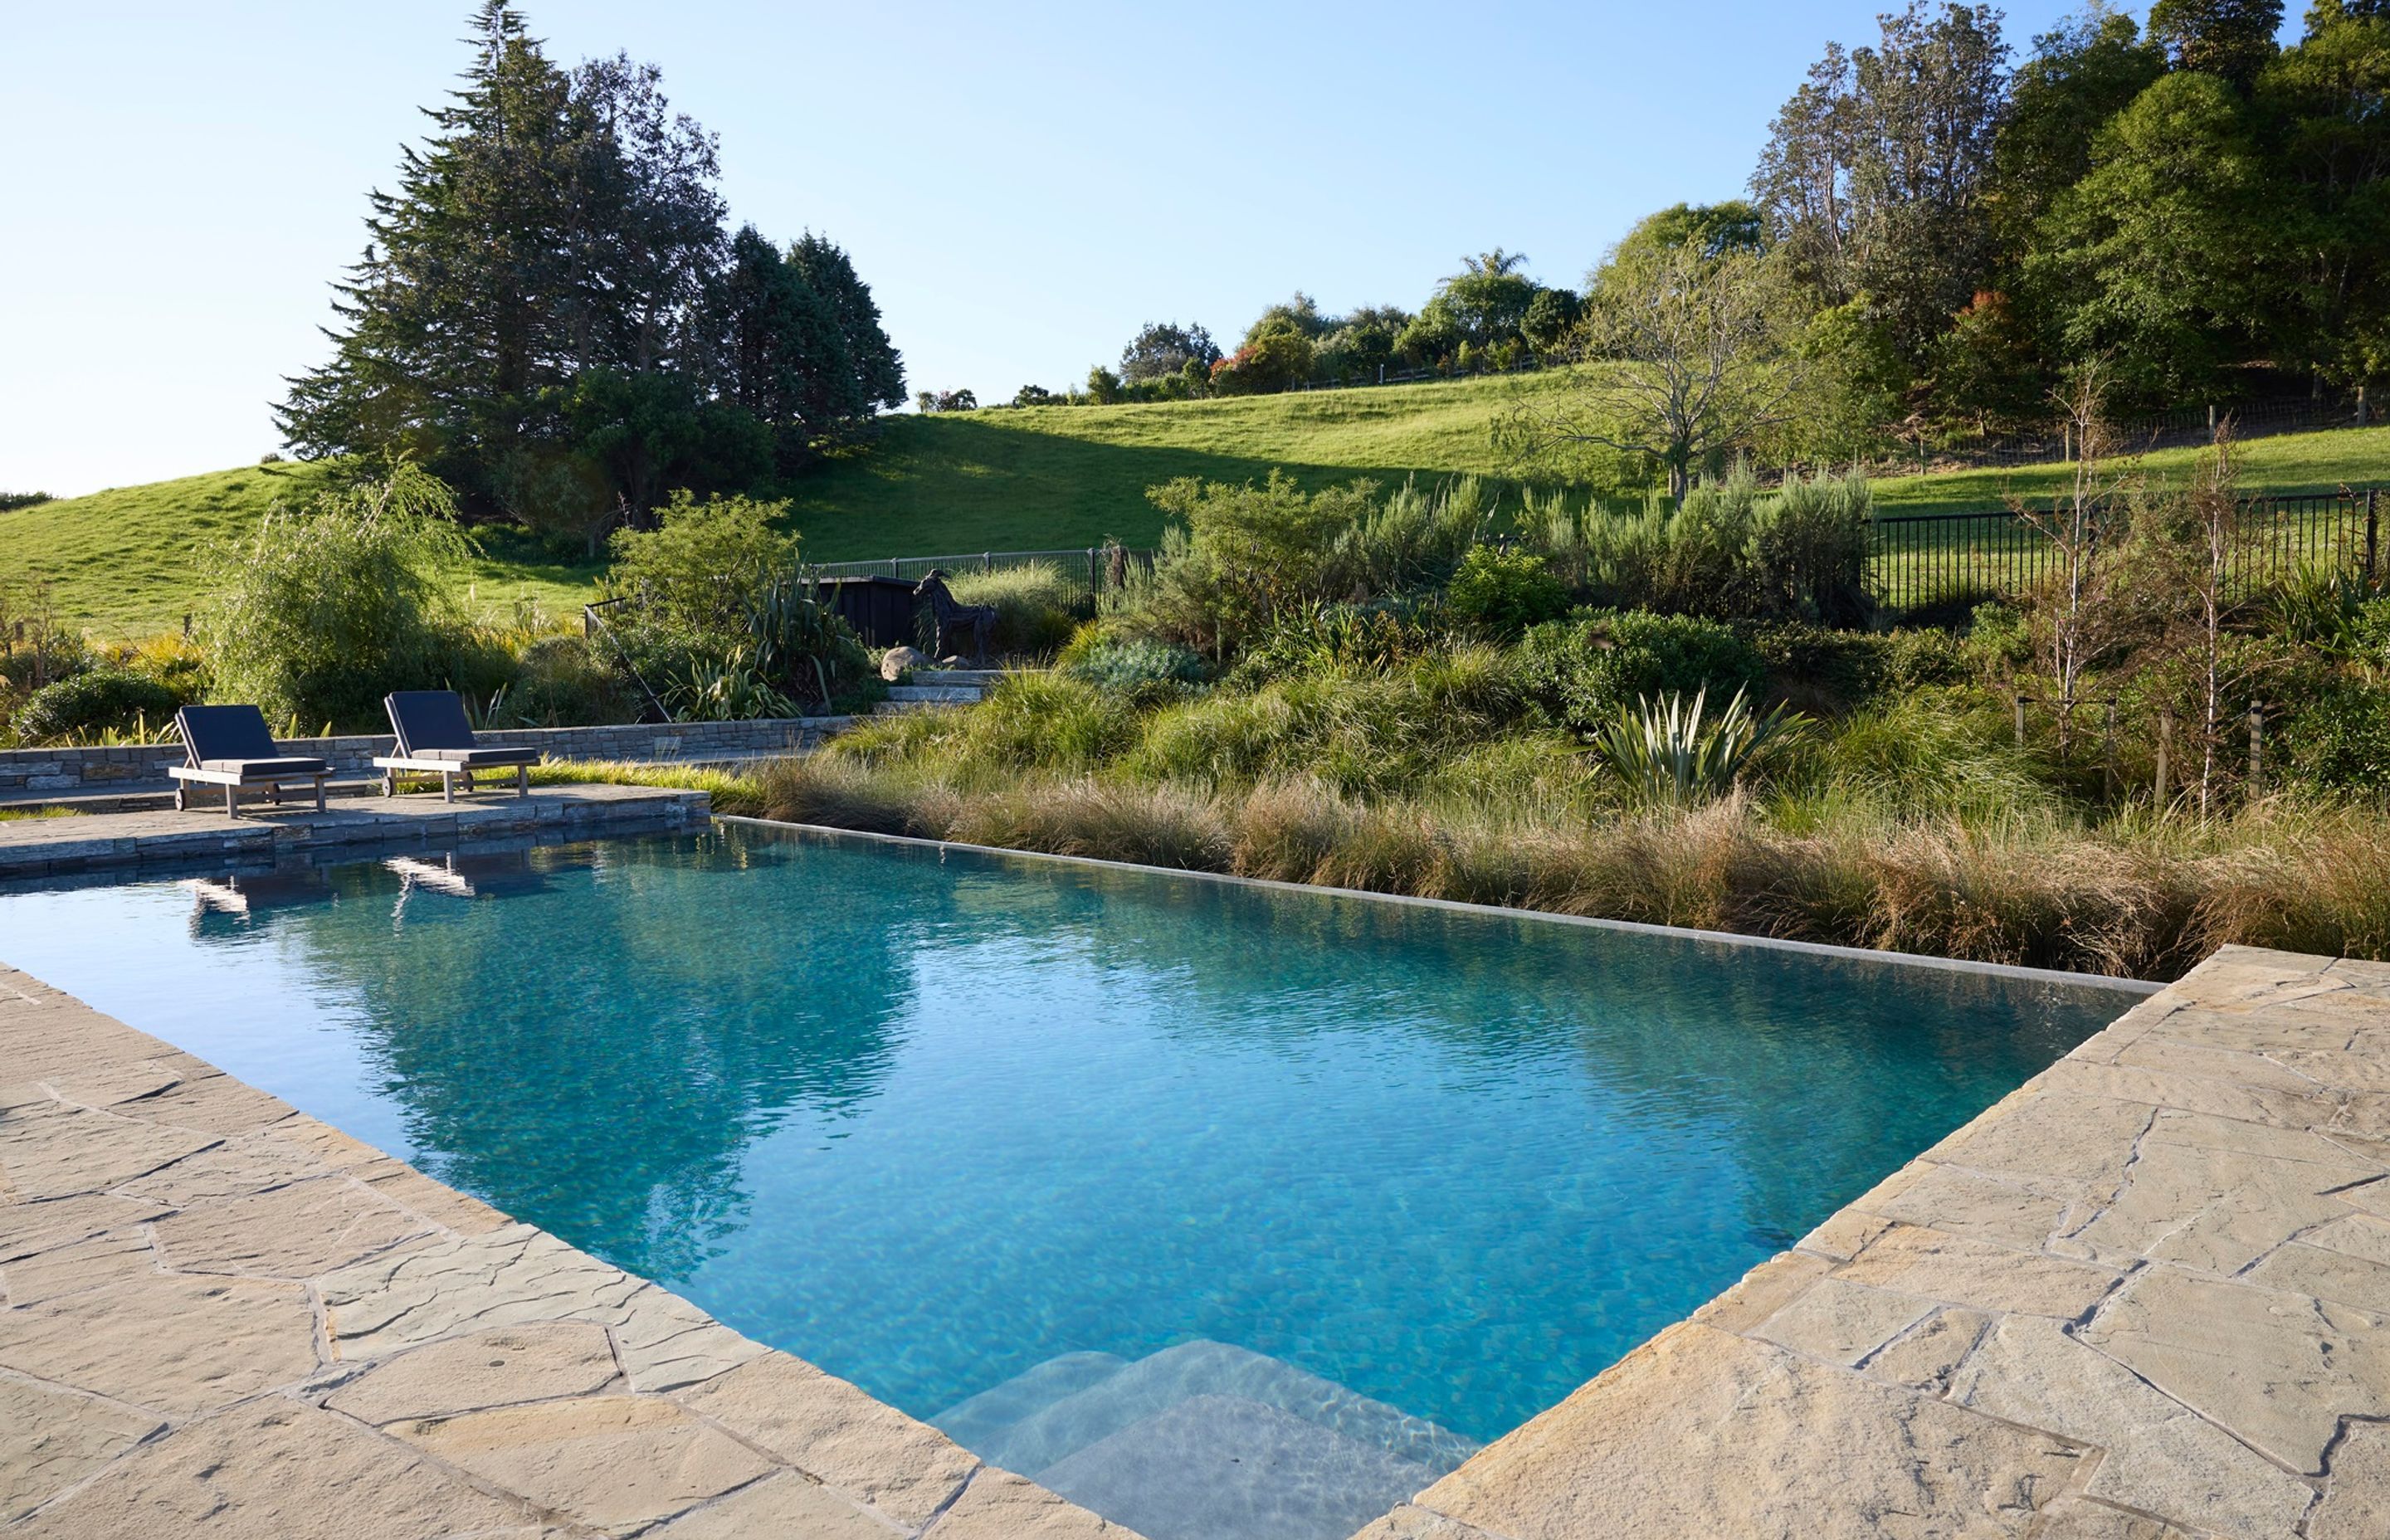 Building a pool: what you need to know for the summer